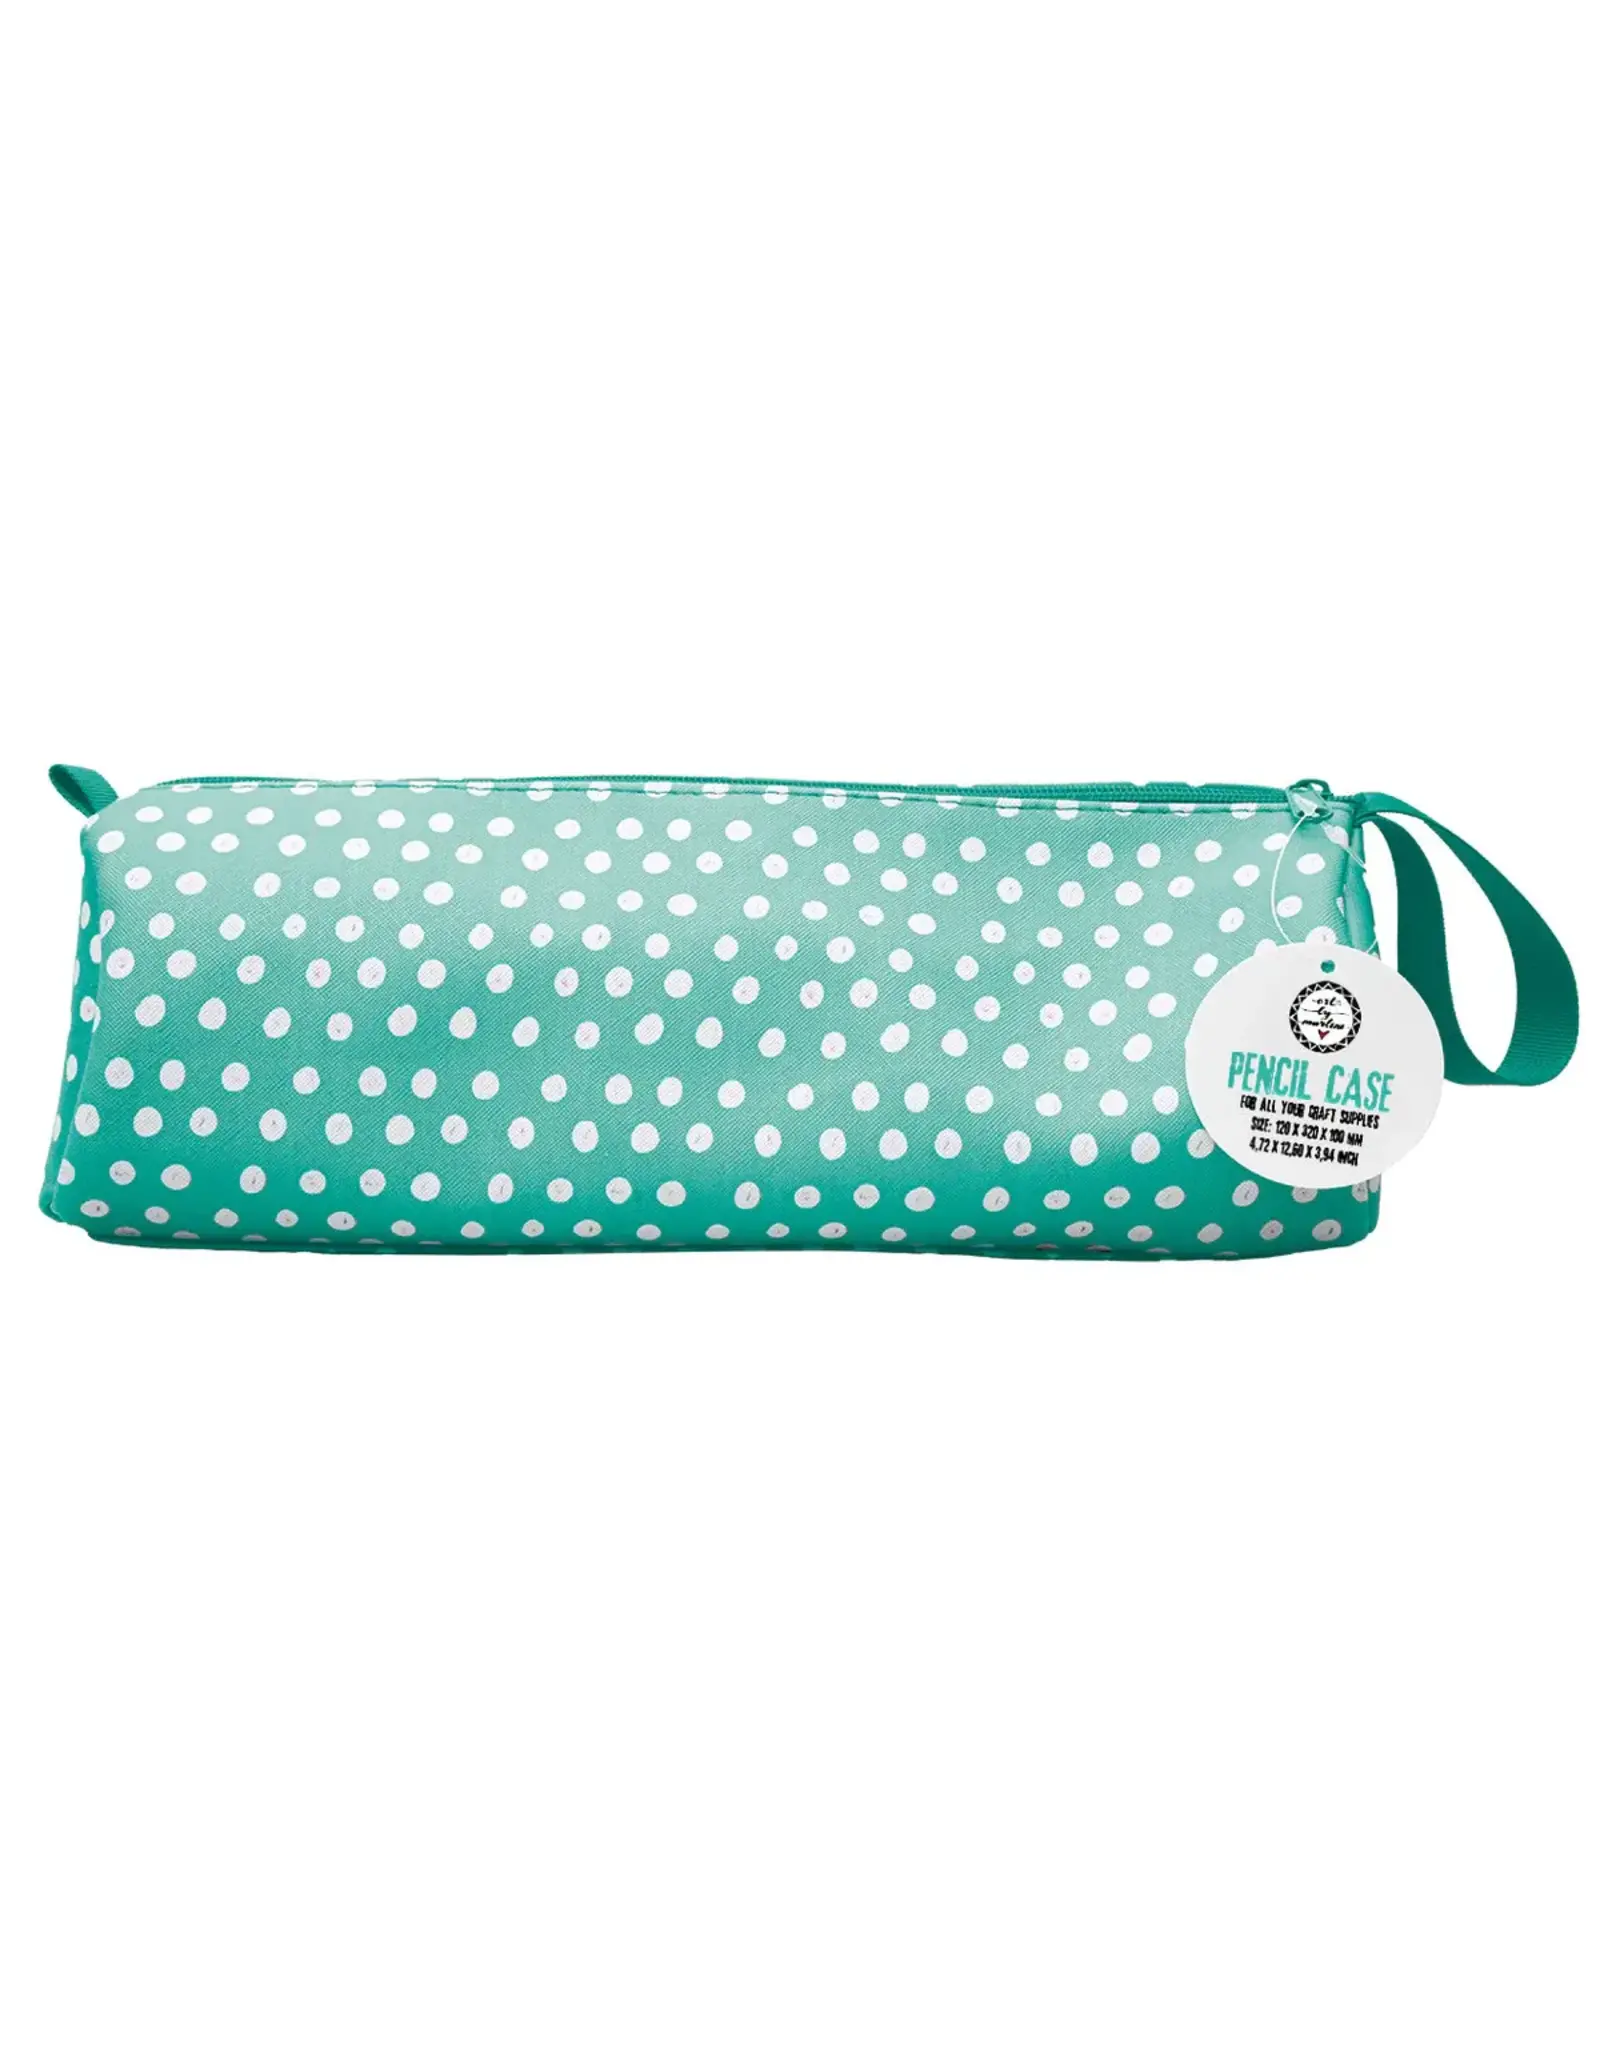 STUDIOLIGHT STUDIOLIGHT ART BY MARLENE SIGNATURE COLLECTION TURQUOISE WITH WHITE DOTS PENCIL CASE